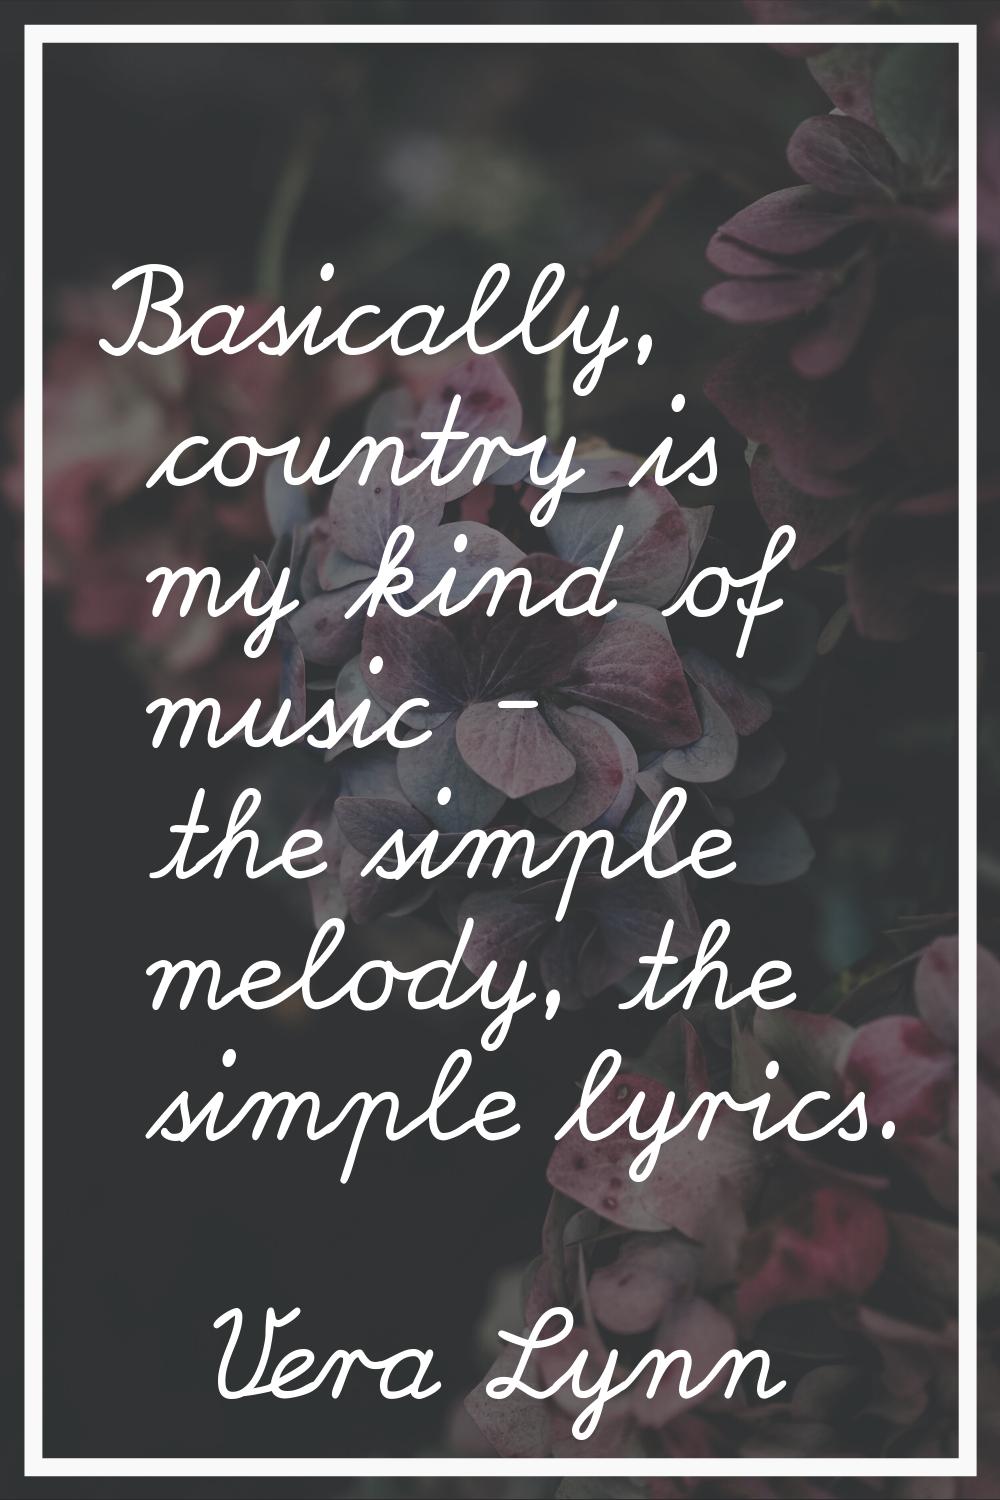 Basically, country is my kind of music - the simple melody, the simple lyrics.